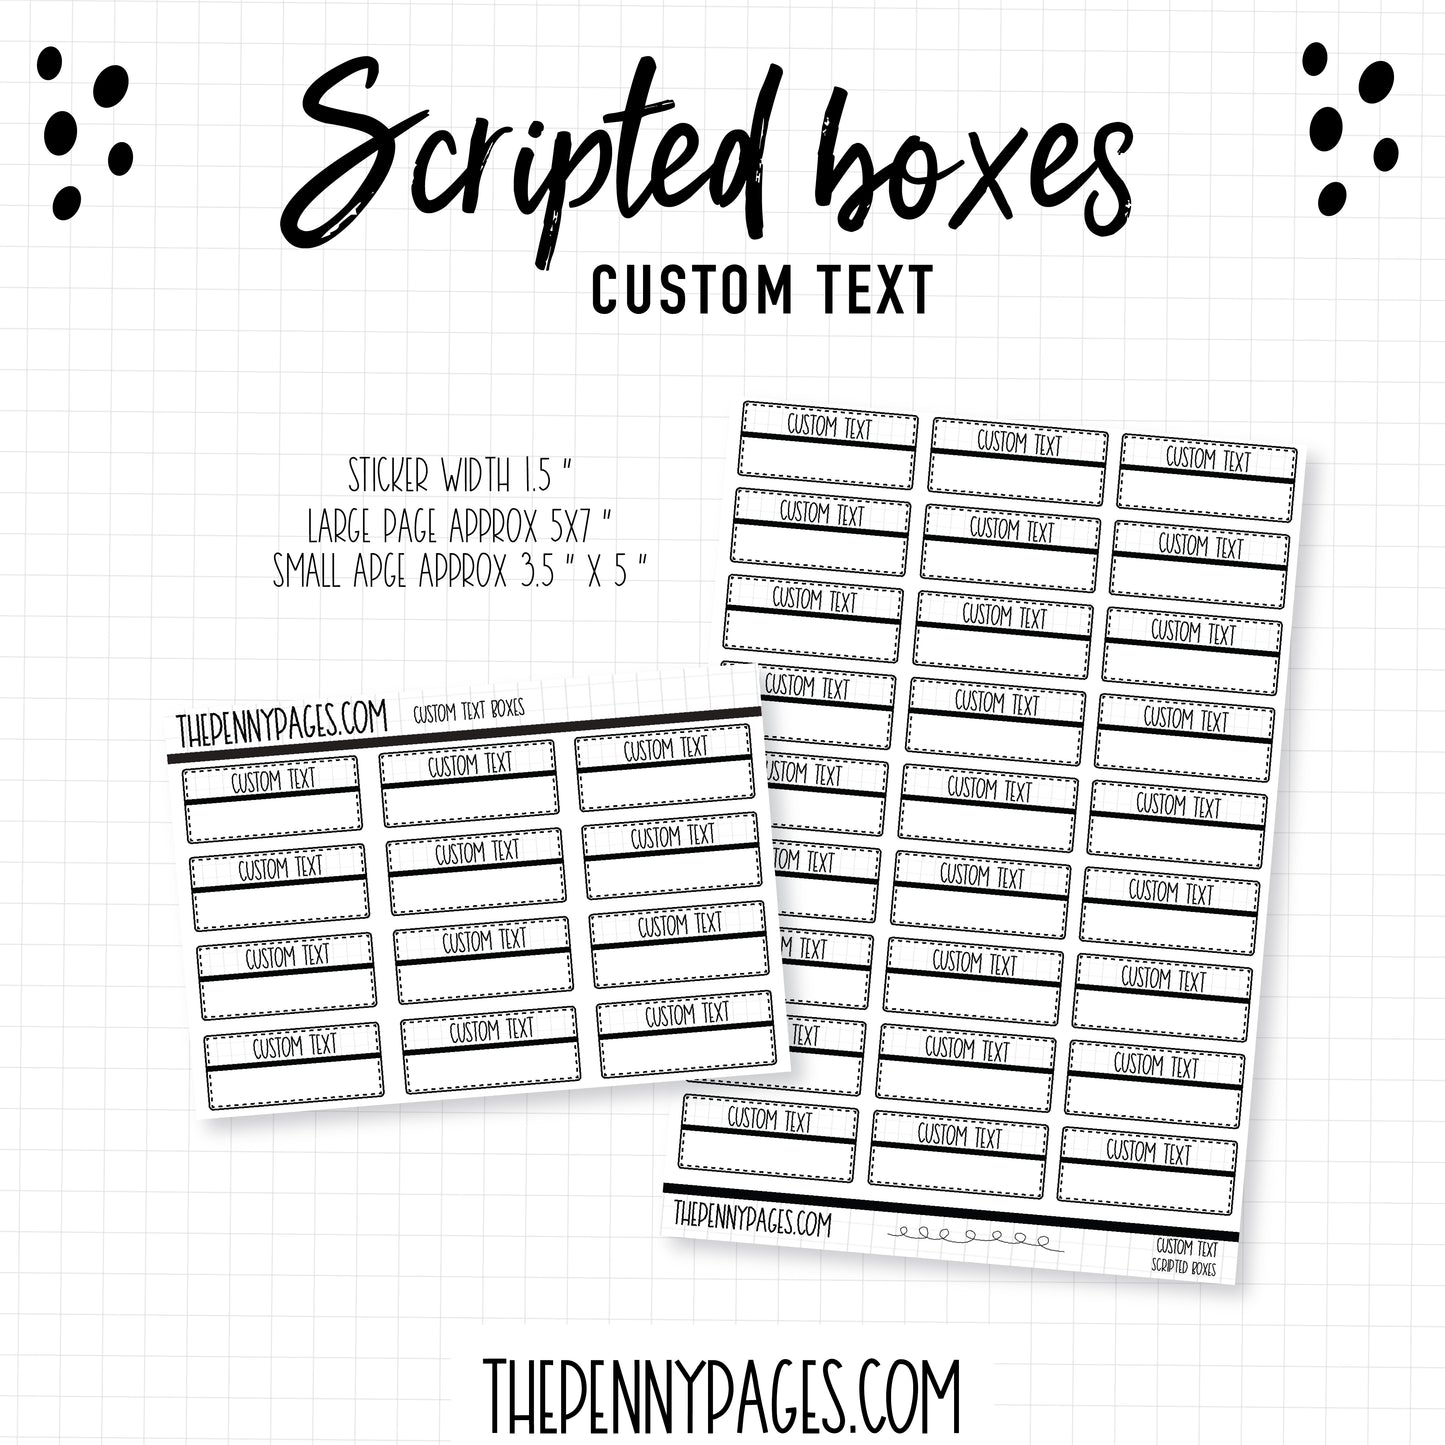 CUSTOM Text - Scripted Boxes small